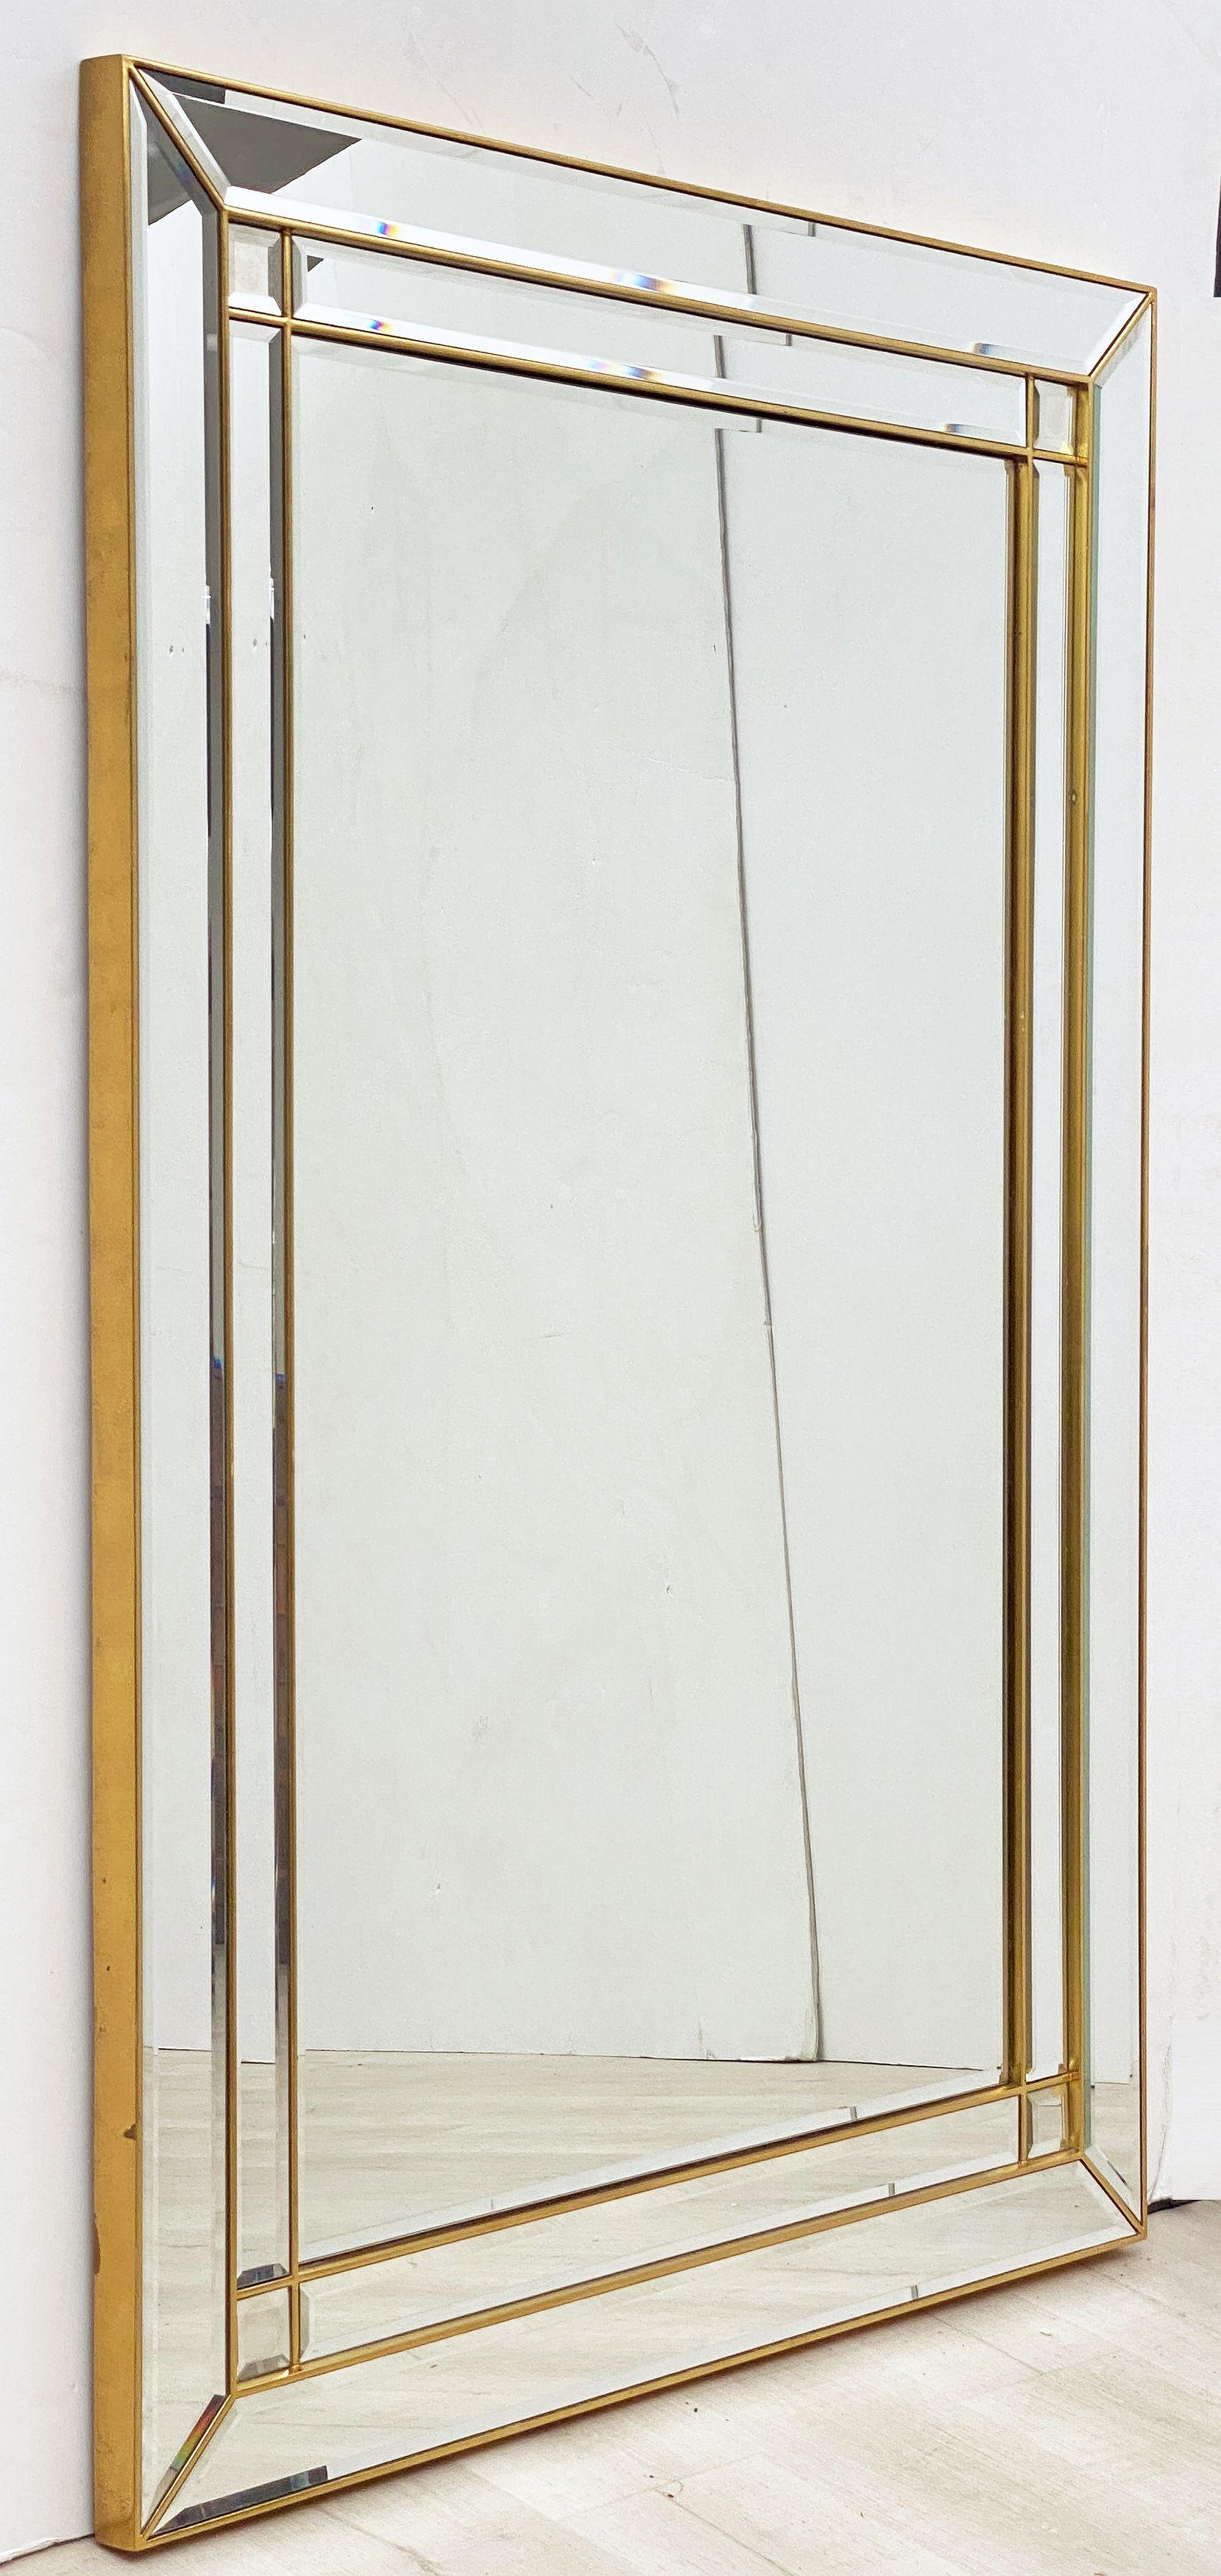 A fine large Belgian rectangular wall or floor-length mirror featuring a stylish, modern pattern of beveled sectioned mirrors in a giltwood frame.

Dimensions are H 57 inches x W 37 inches